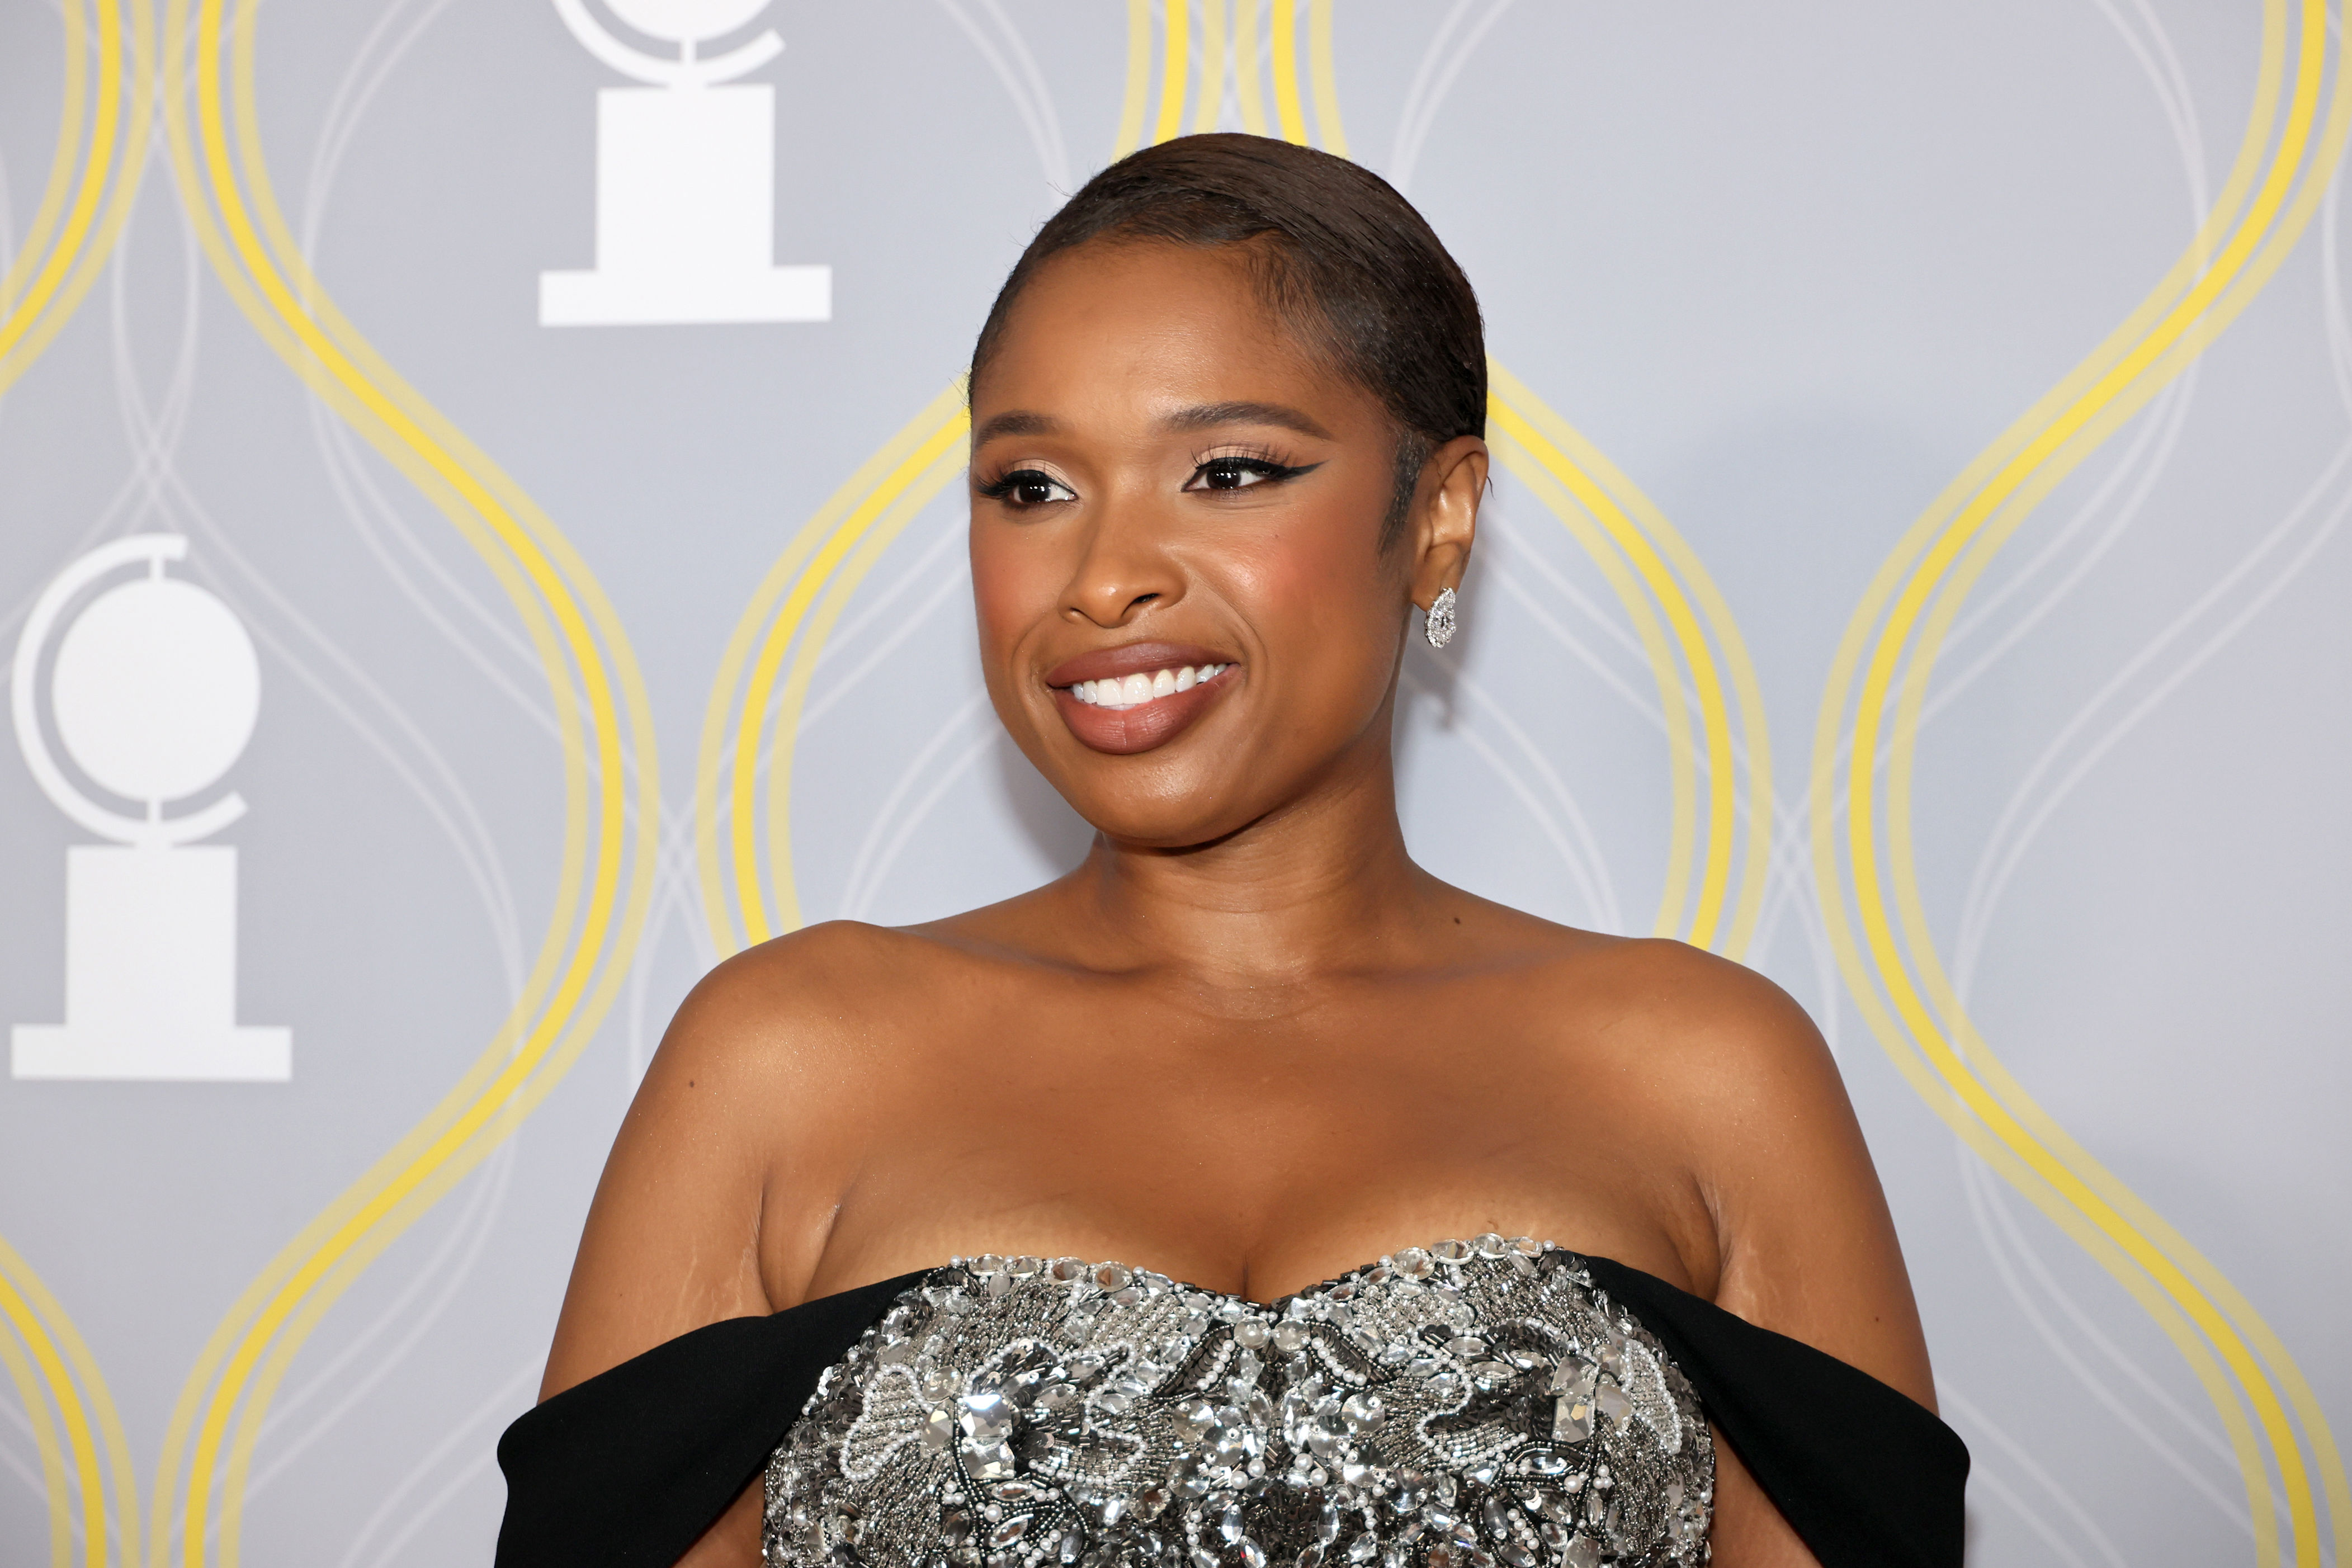 <p>At the <a href="https://www.wonderwall.com/awards-events/red-carpet/plus-more-celebs-at-the-2022-tony-awards-610712.gallery">75th Annual Tony Awards</a> in June 2022, Jennifer Hudson became, at 40, the youngest female to achieve EGOT status when <span>the Broadway musical she co-produced, "</span>A Strange Loop,"<span> was named best musical. She previously won an Emmy (in 2021), two Grammys (in 2009 and 2017) and an Oscar (in 2007).</span> She is now one of <a href="https://www.wonderwall.com/celebrity/photos/egot-winners-stars-who-have-emmy-grammy-oscar-tony-award-829478.gallery">just 19 people who can call themselves EGOT winners</a>.</p>